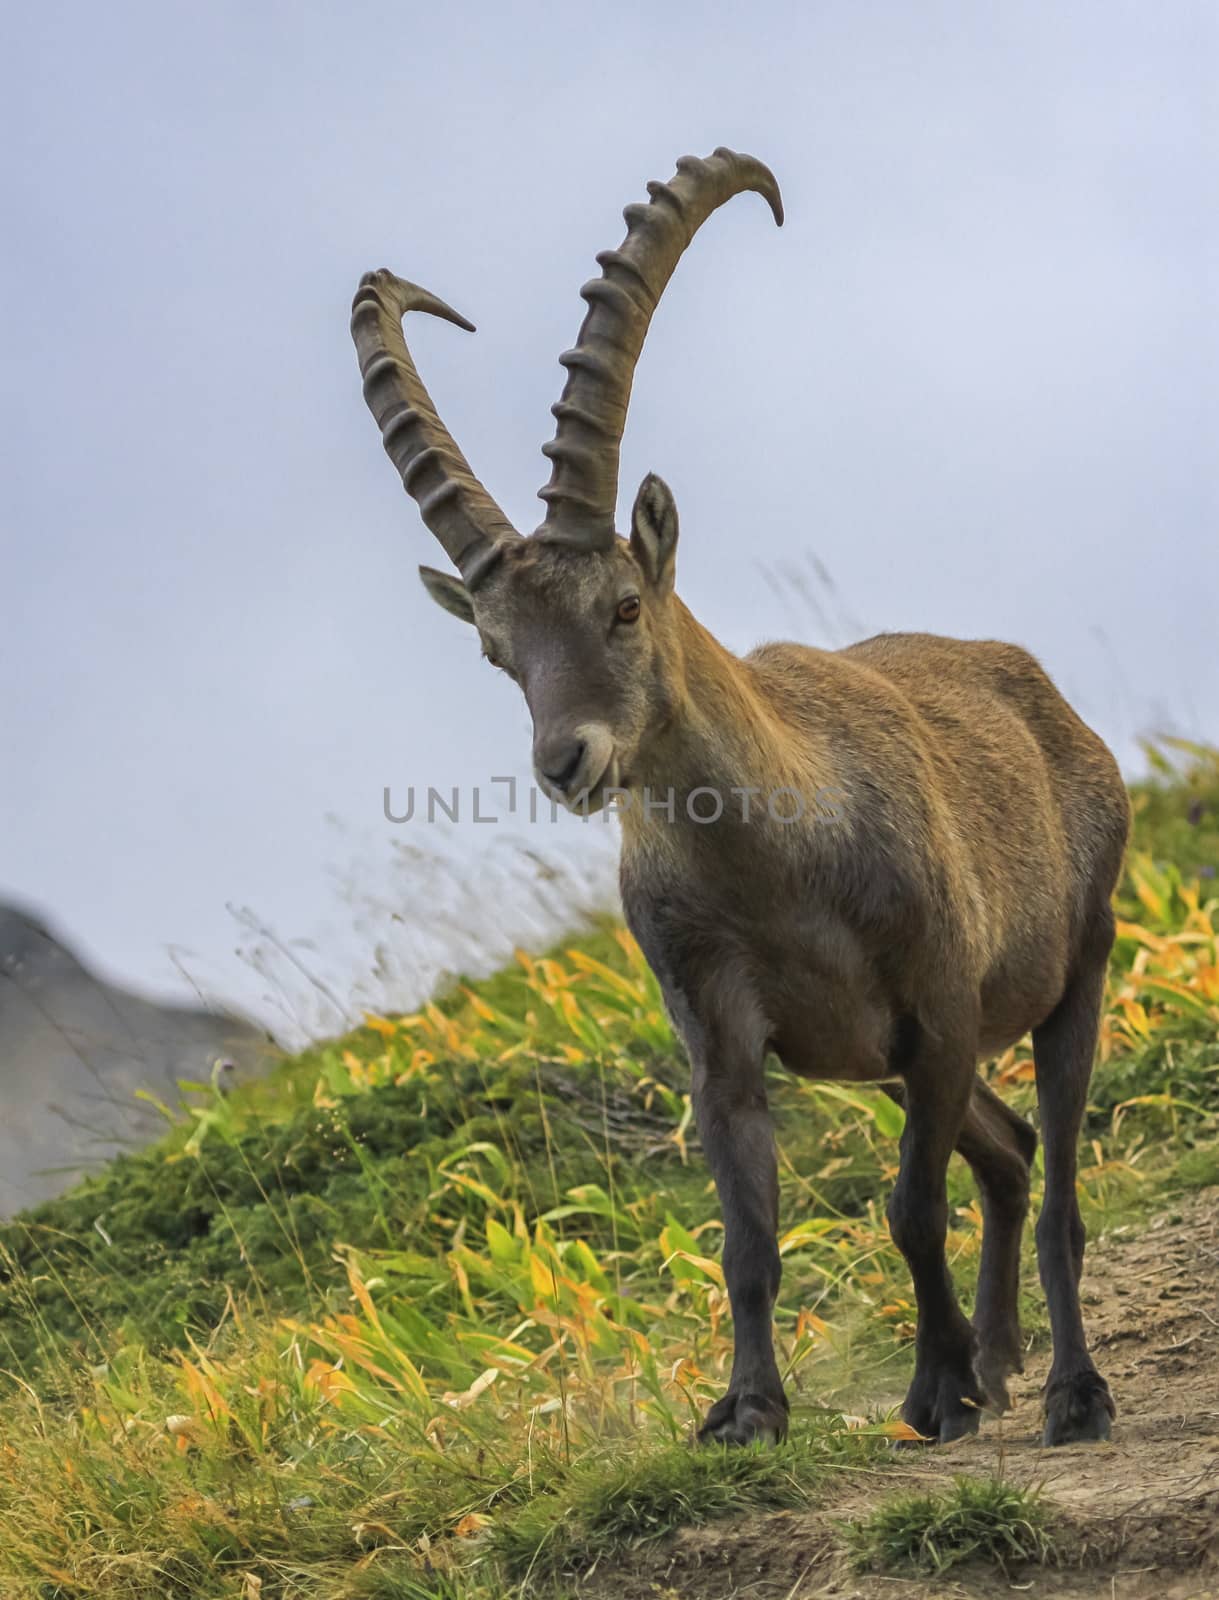 Steinbock or Alpine Capra Ibex portrait at Colombiere pass, France by Elenaphotos21